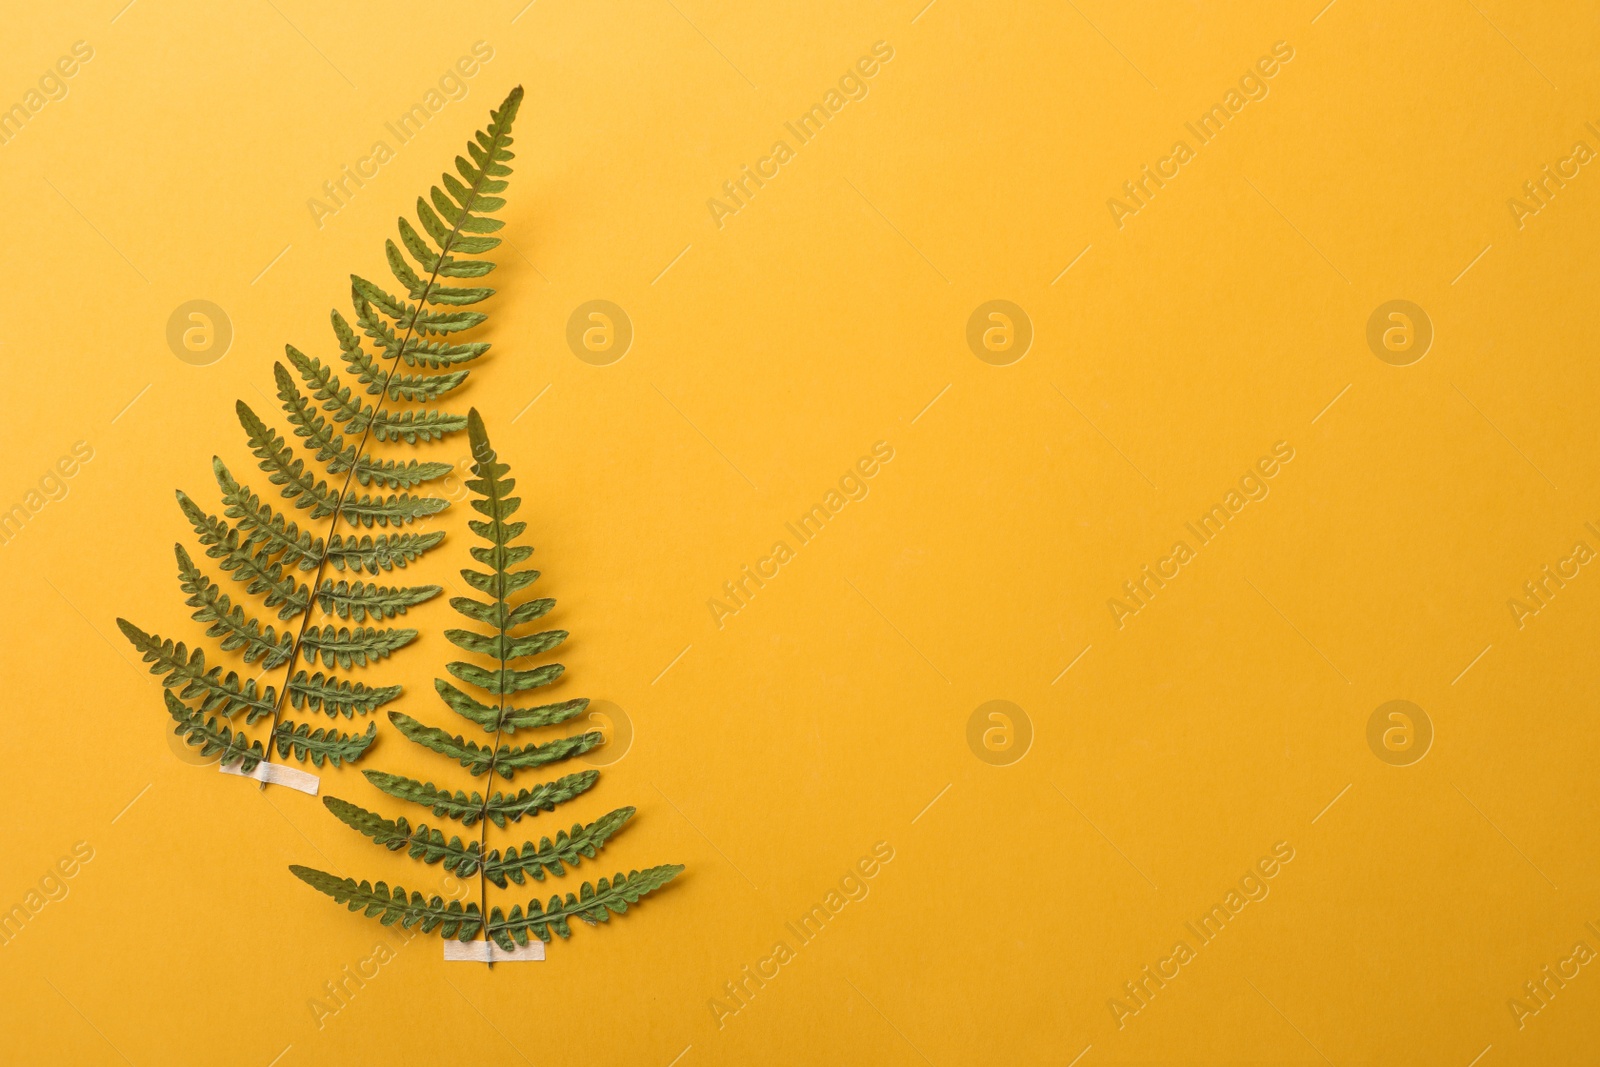 Photo of Wild pressed dried fern leaves on orange background, space for text